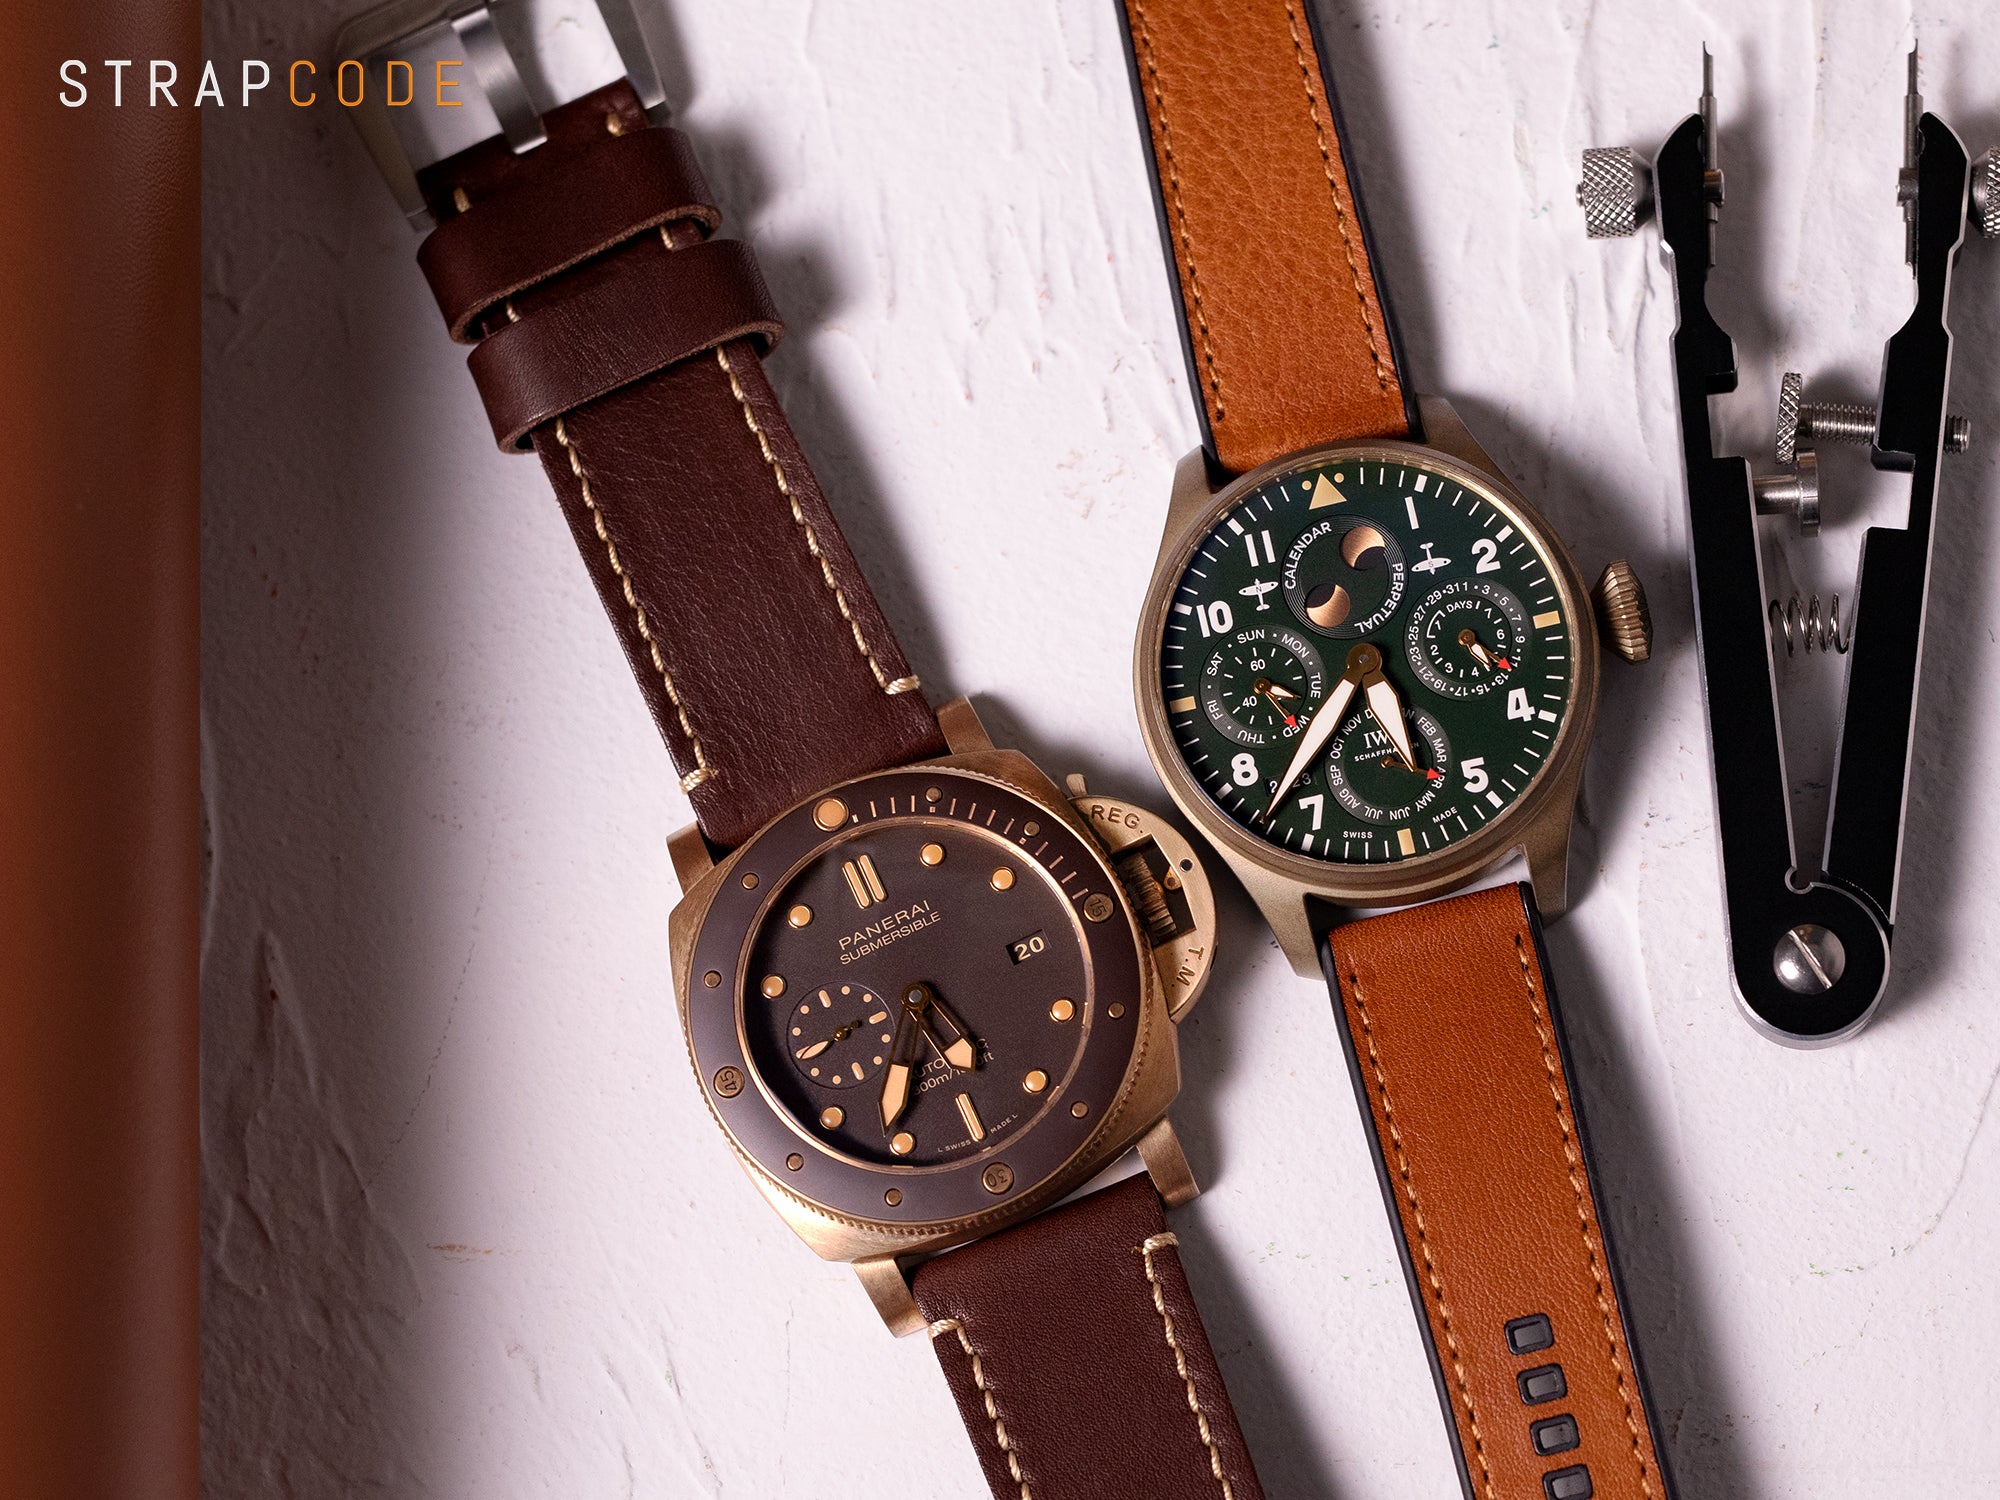 Two Bronze watches :  IWC Big Pilot's Watch Perpetual Calendar Spitfire IW503601 and the Panerai Submersible Bronzo PAM 968